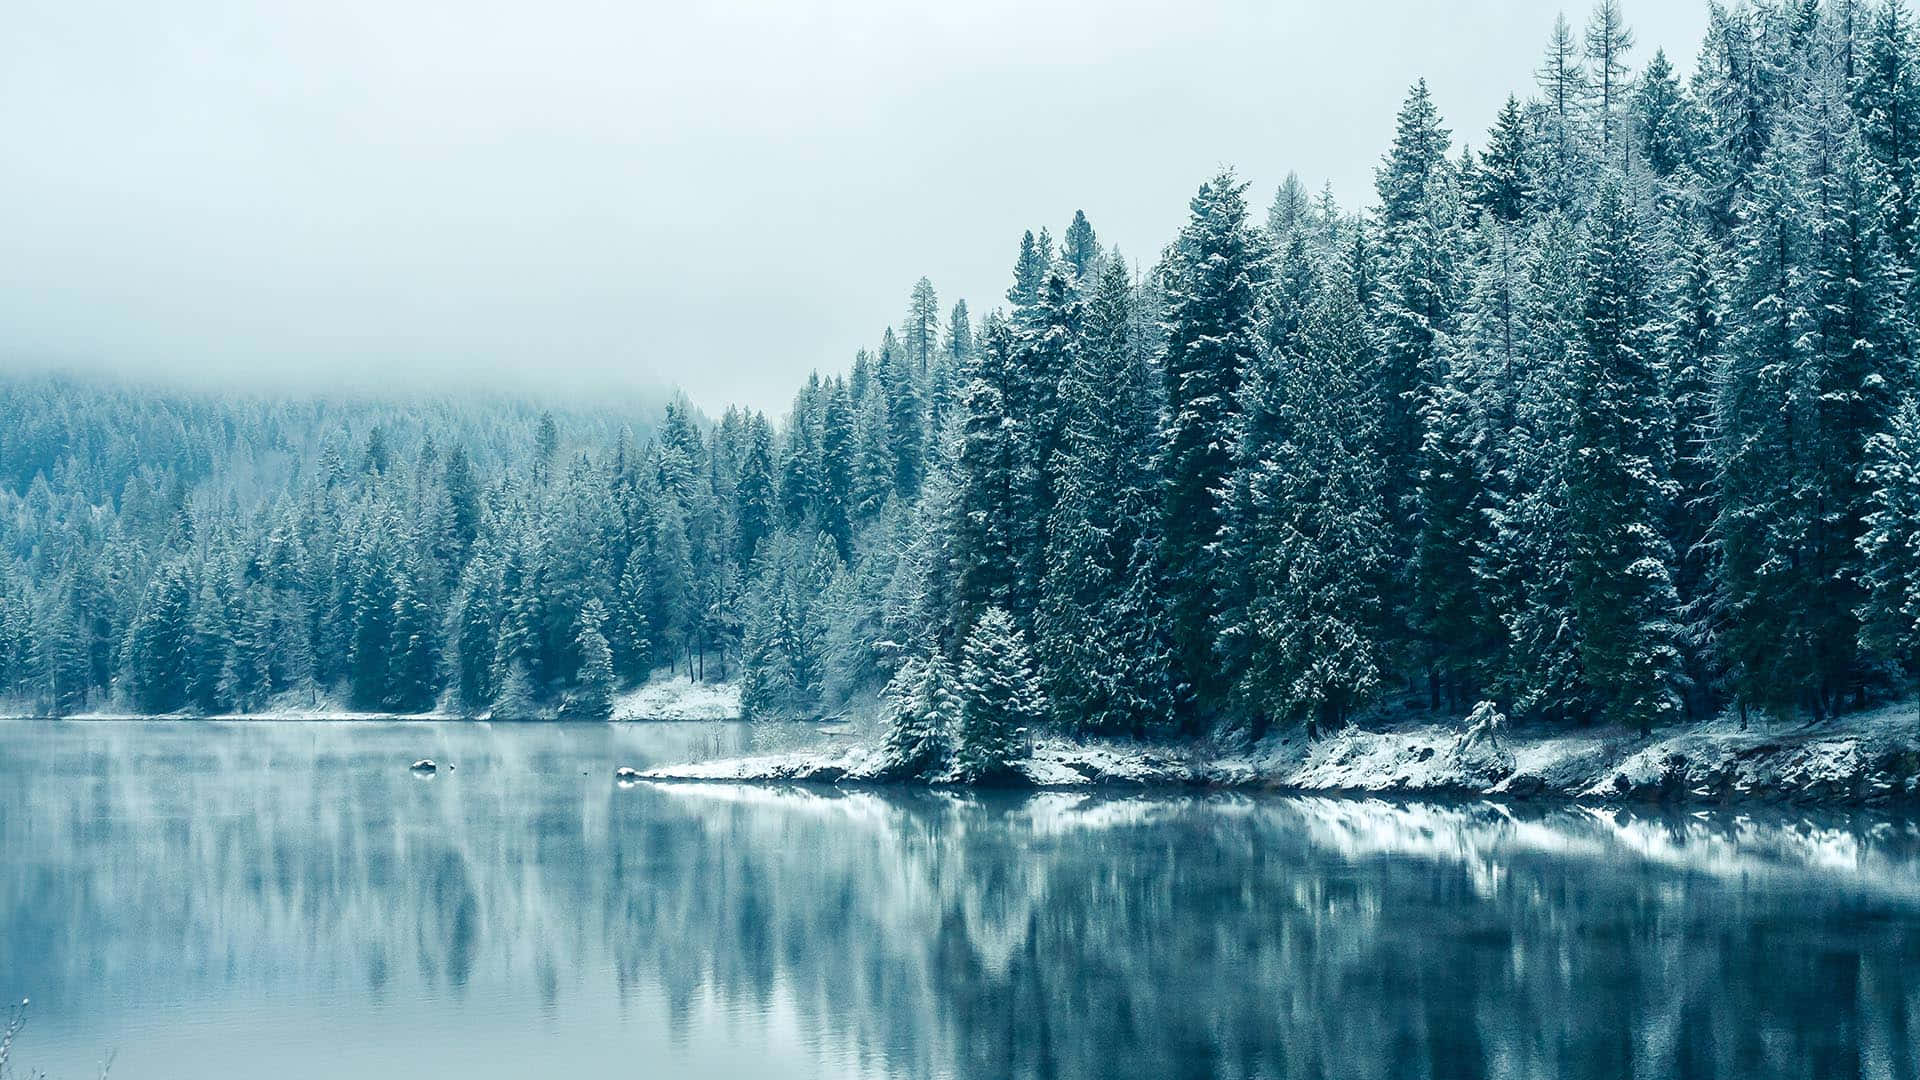 Snow-covered Winter Trees on a Serene Landscape Wallpaper